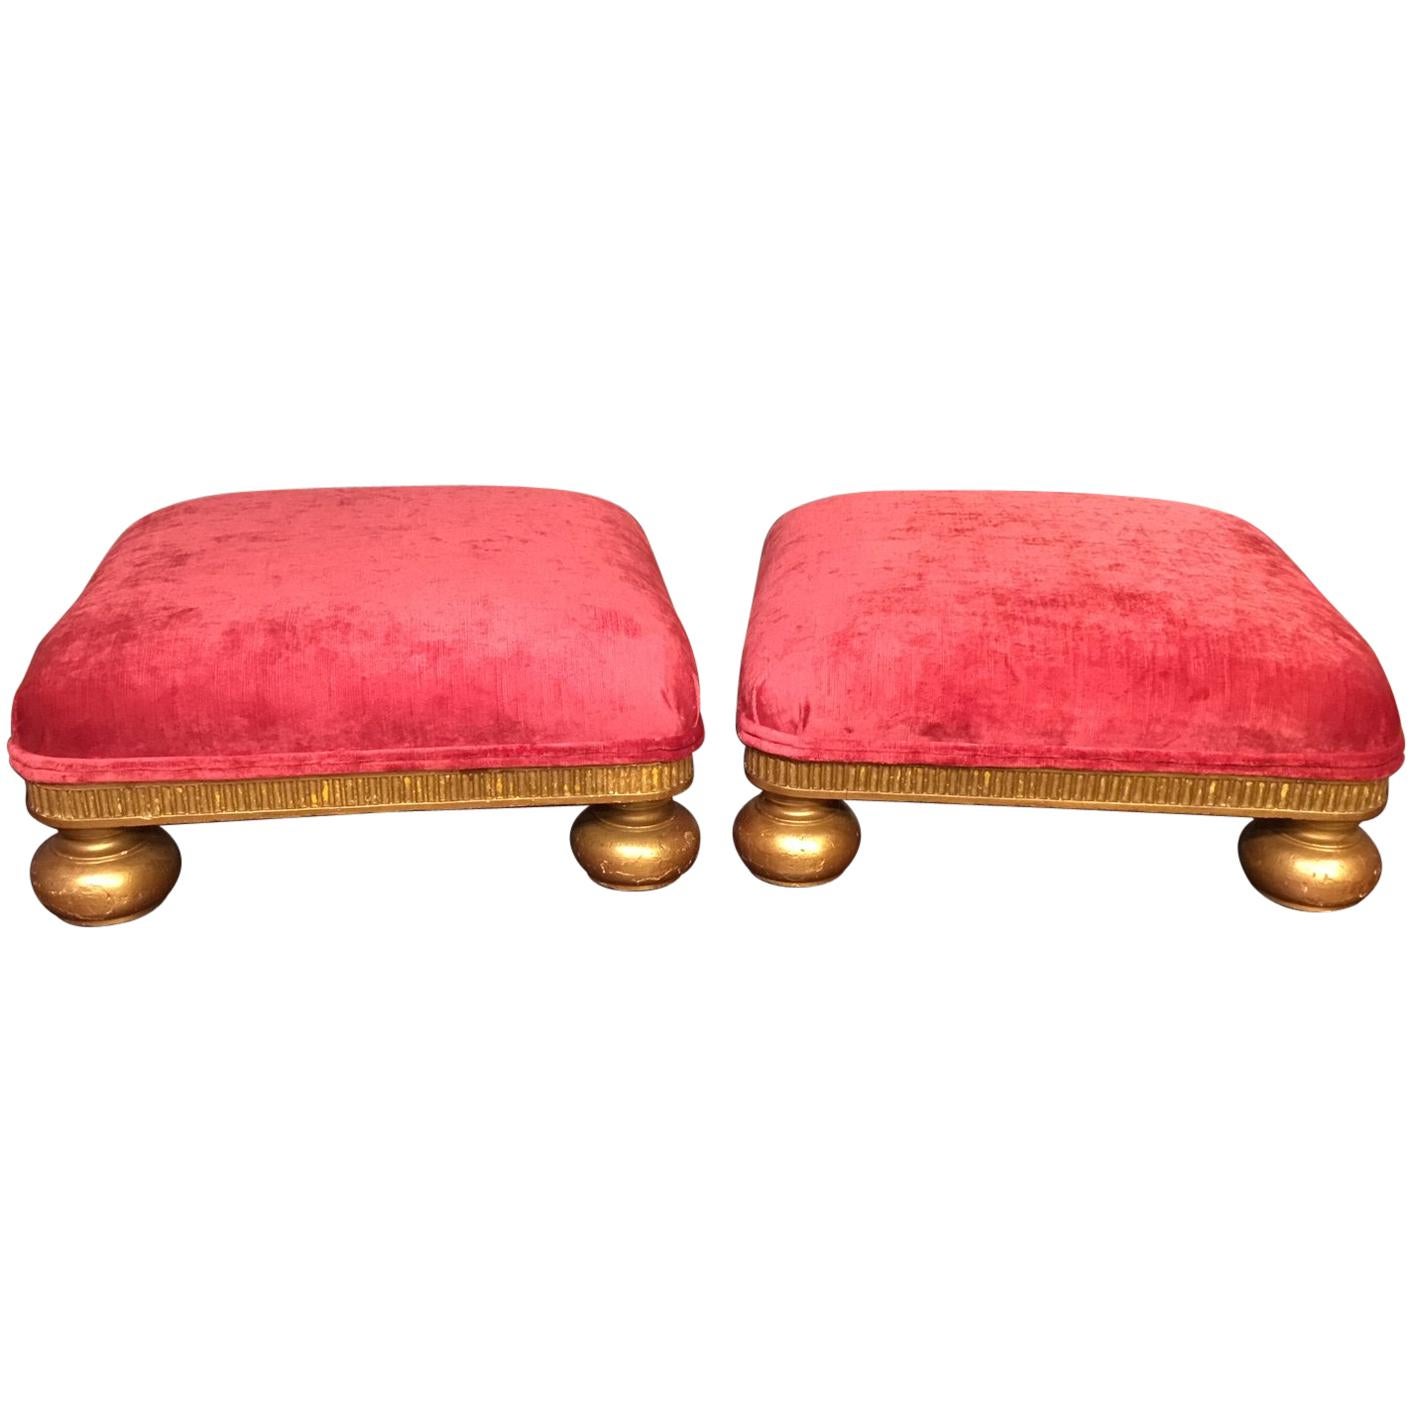 Pair of Small Giltwood Victorian Period Foot Stools